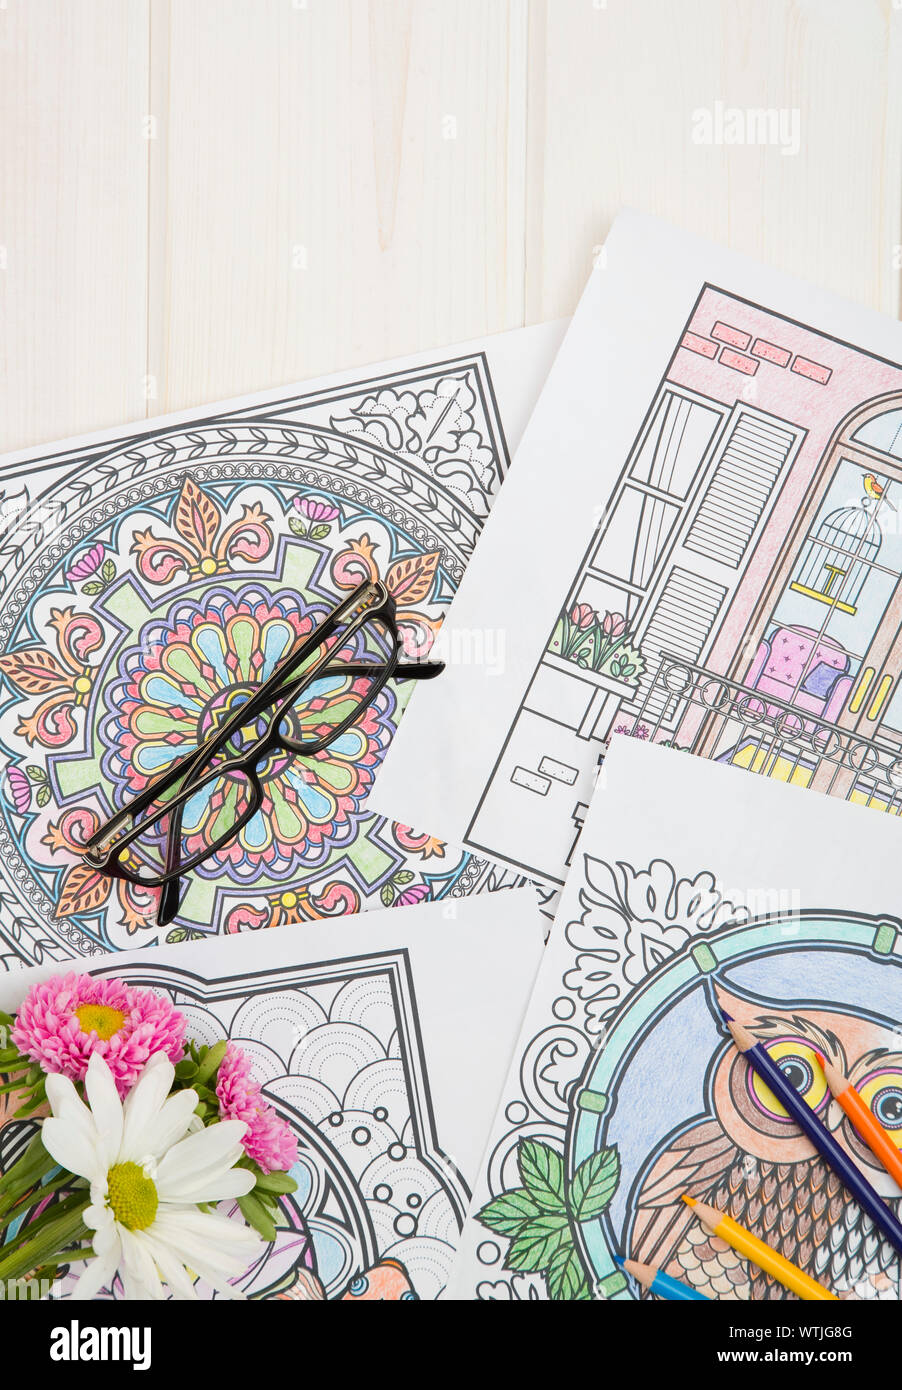 Eyeglasses on coloring book page Stock Photo